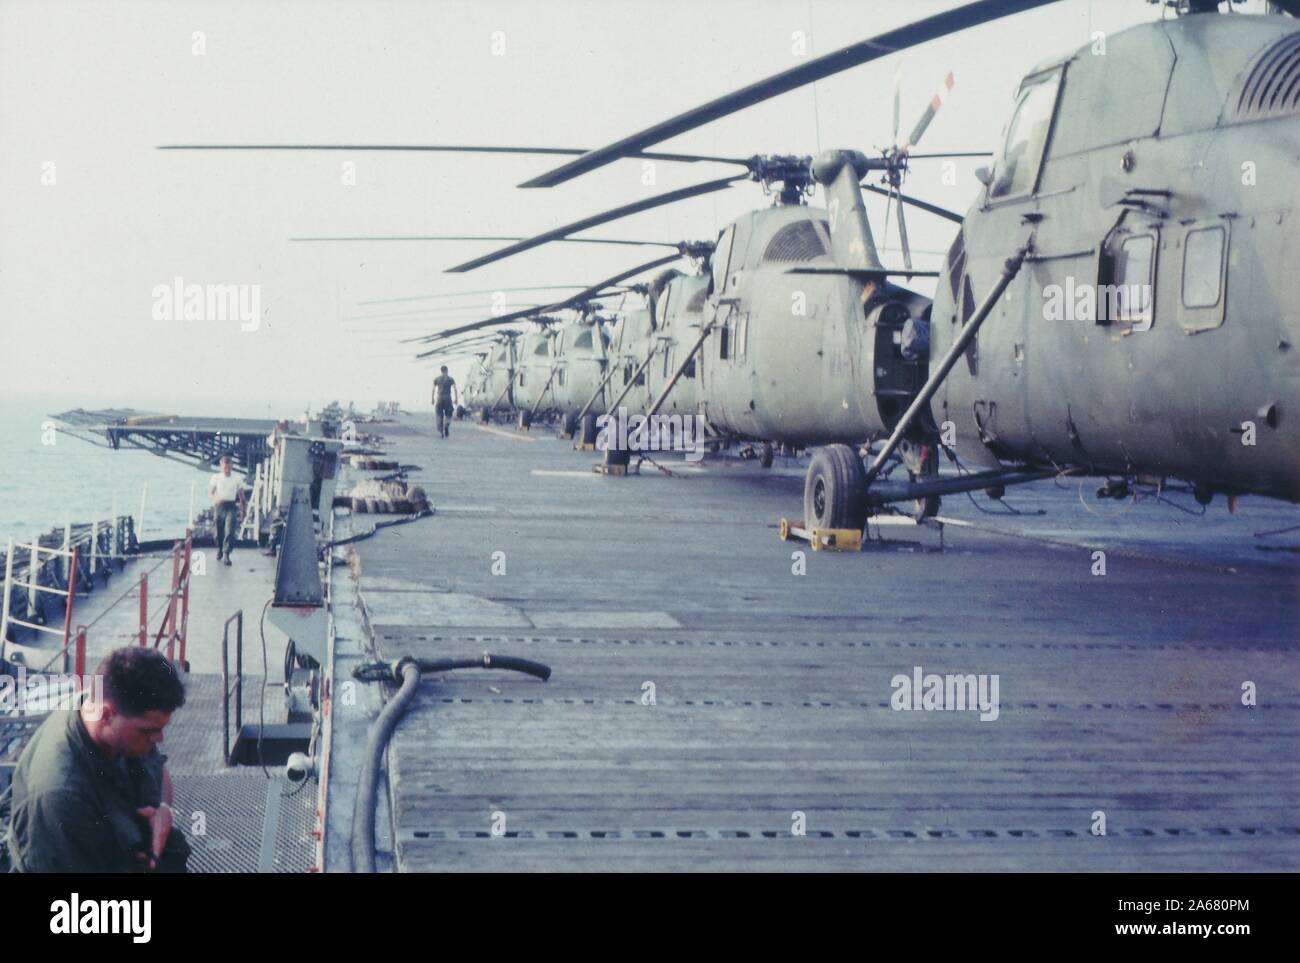 Two American servicemen stand and walk near a row of helicopters docked on the deck of a military aircraft carrier located near the coast of Vietnam, 1965. () Stock Photo